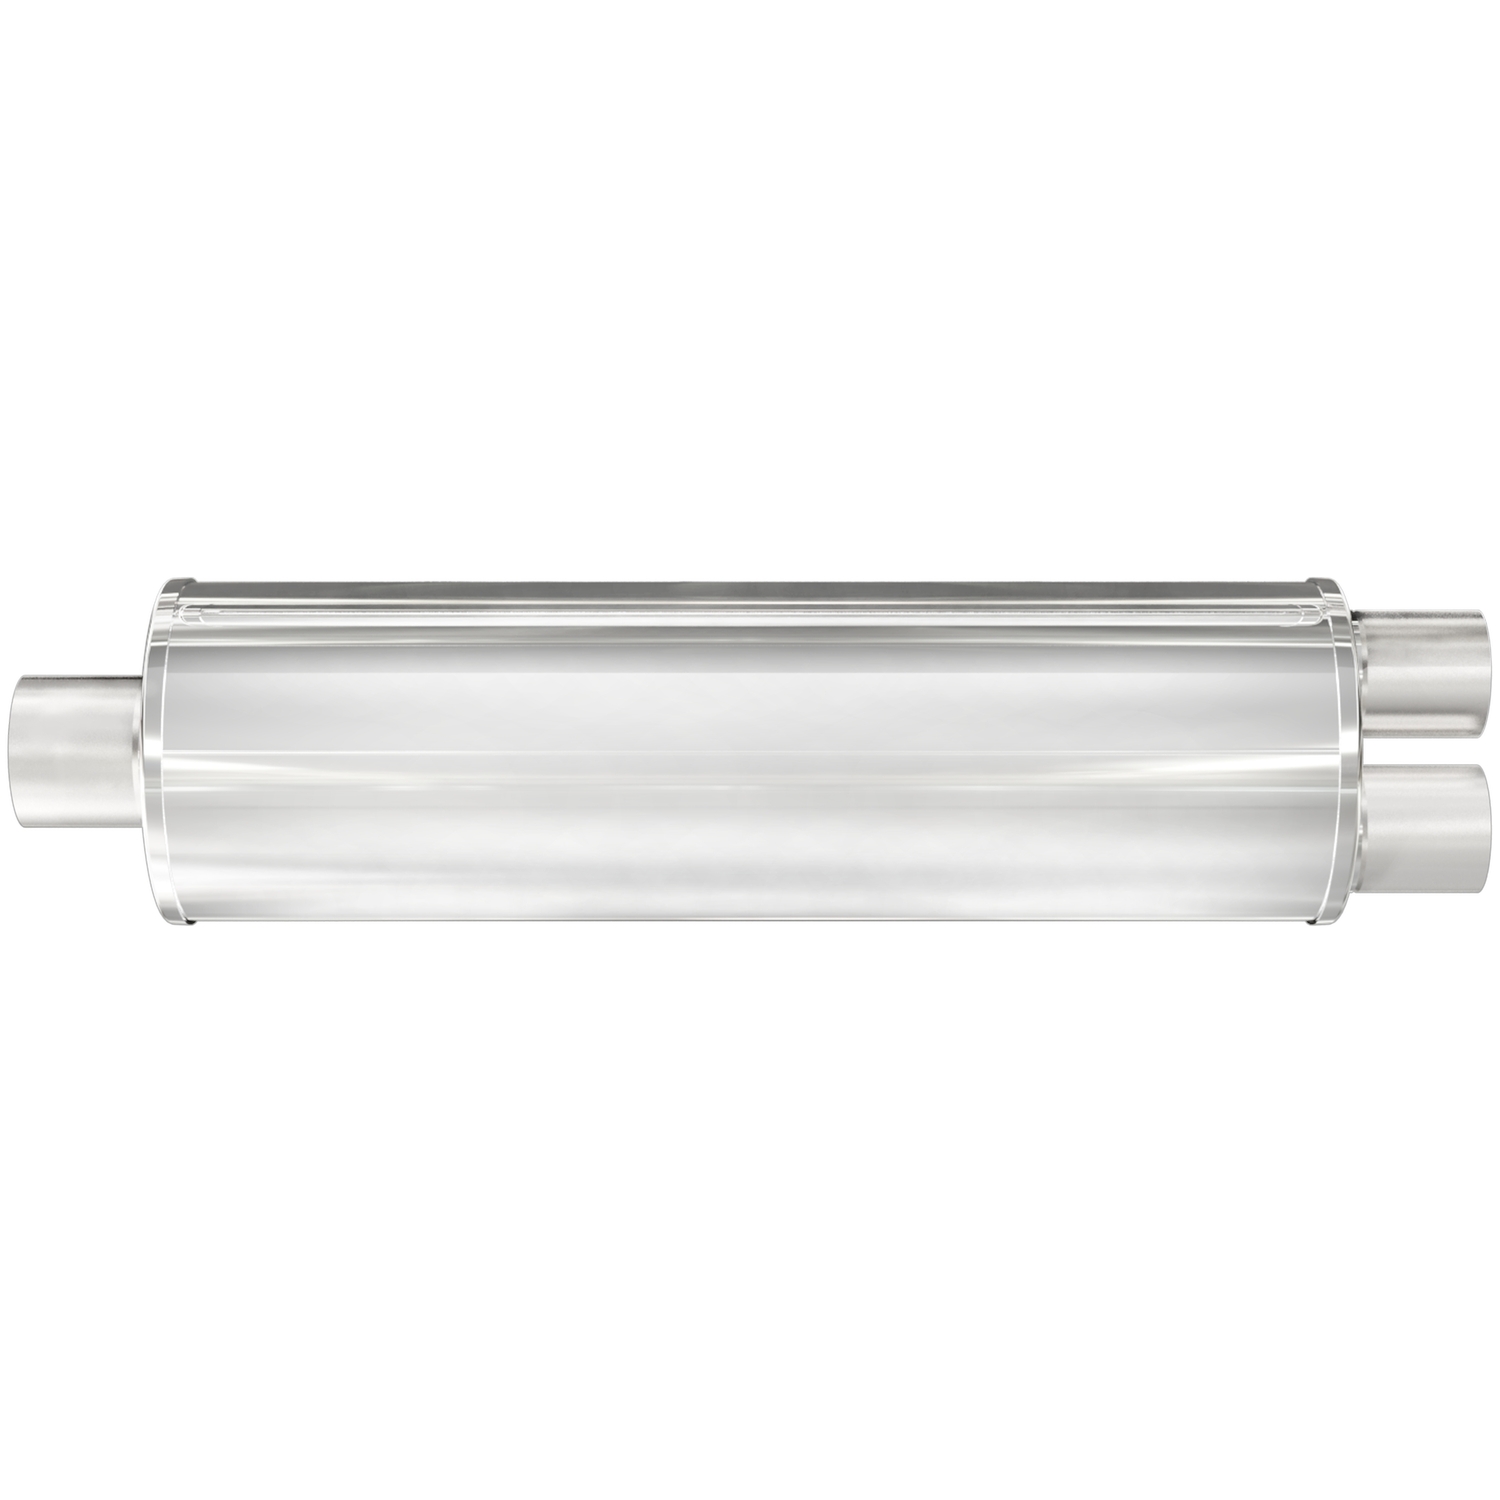 7" Round XL 3-Chamber Muffler Single In/Dual Out: 2.5"/2.5" Body Length: 27" Overall Length: 33" Satin Finish